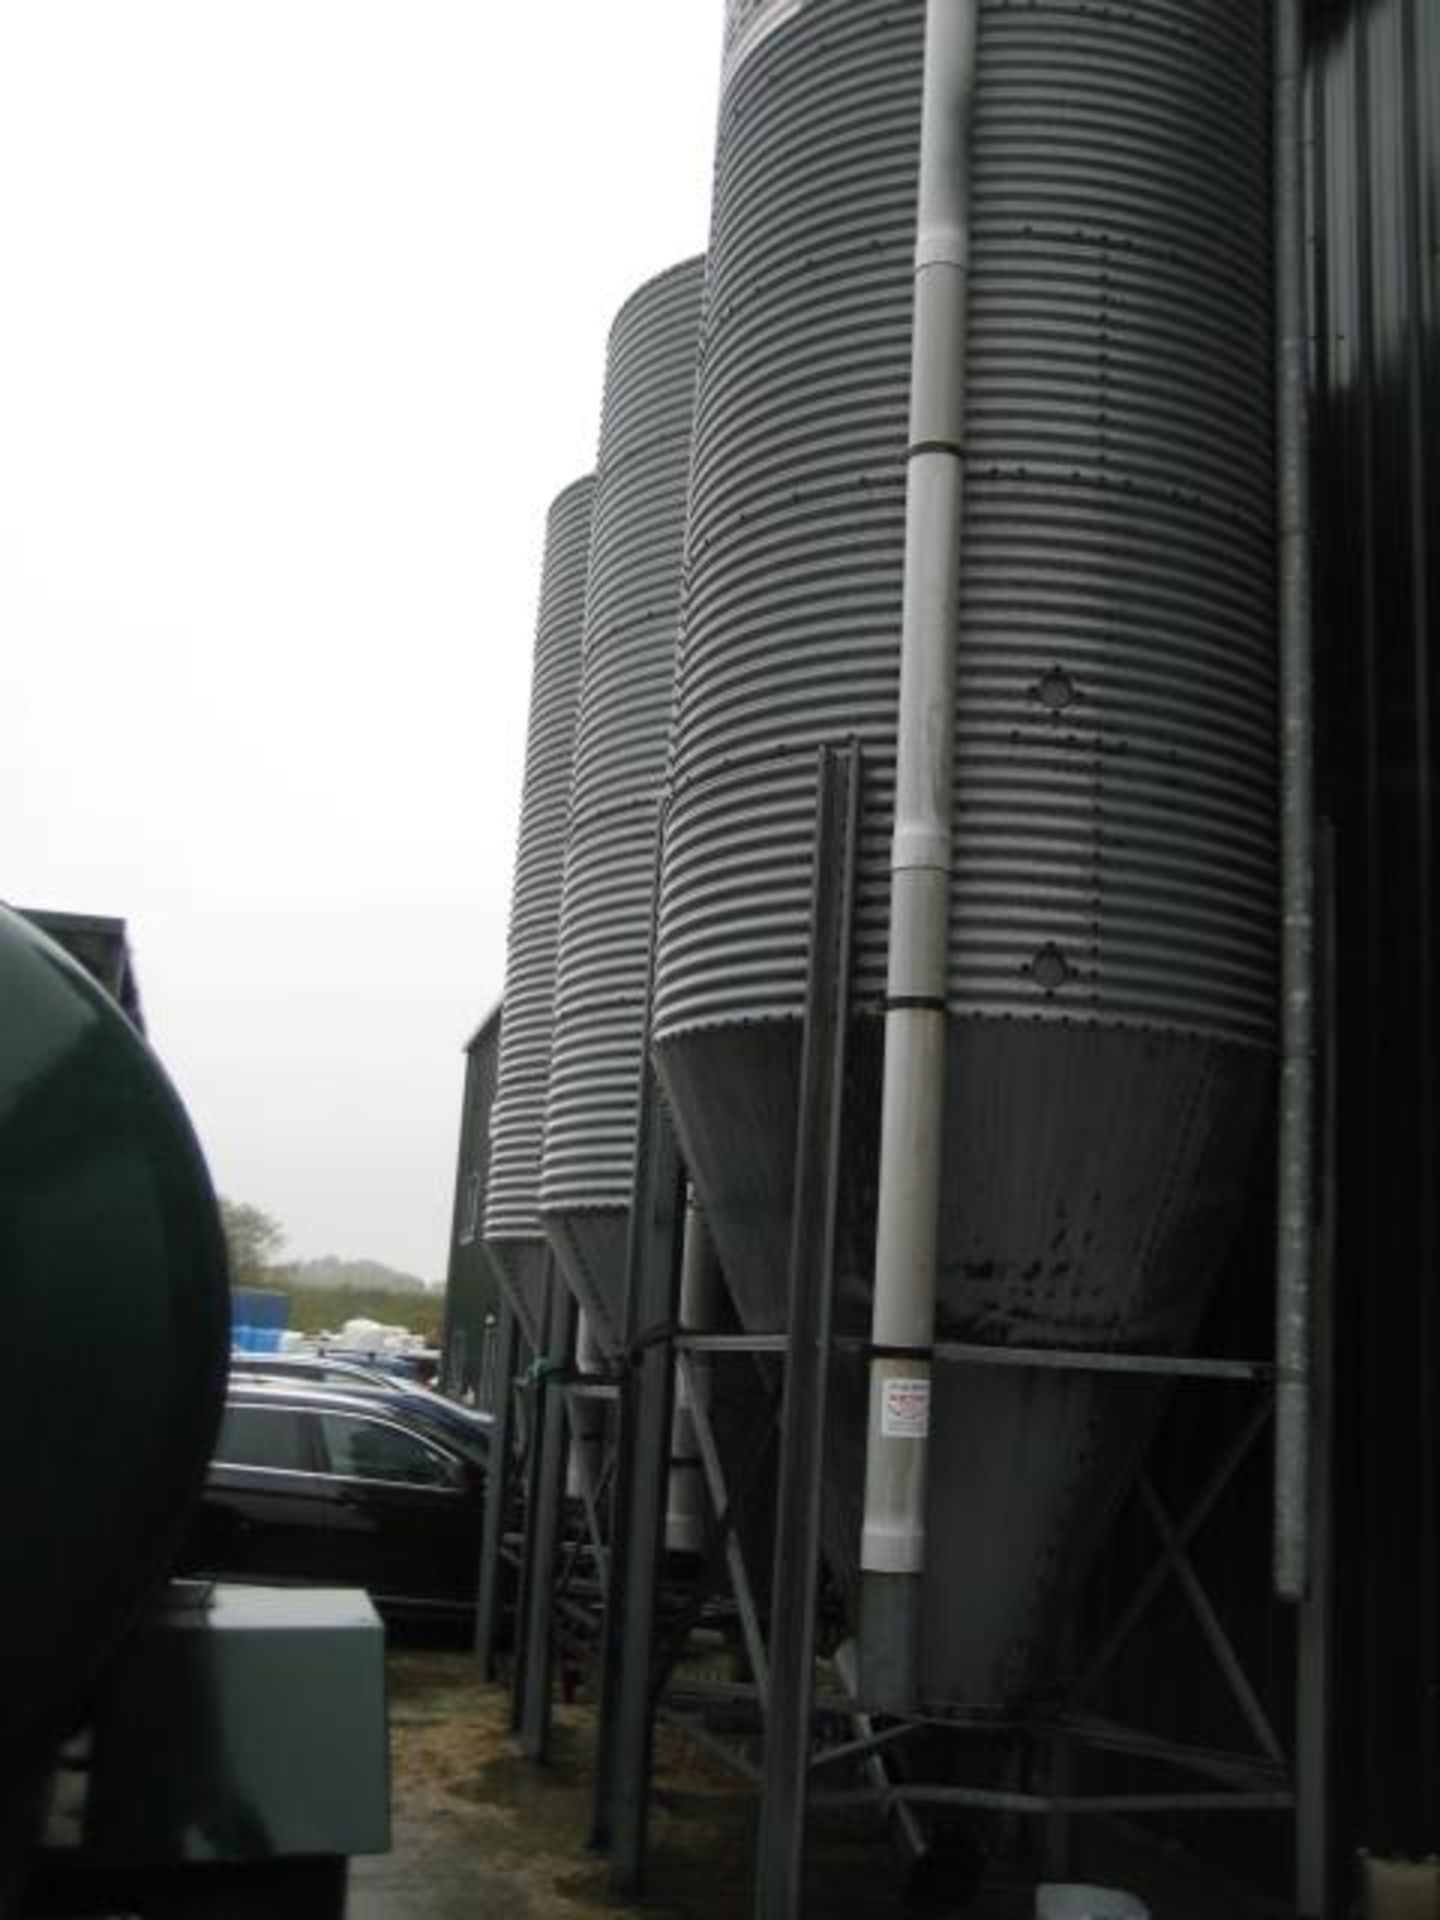 Feed Bins - Feed bins of various sizes. (9 remaining) (UCPE 6346) Price - £4,000 each. Please read - Image 2 of 11